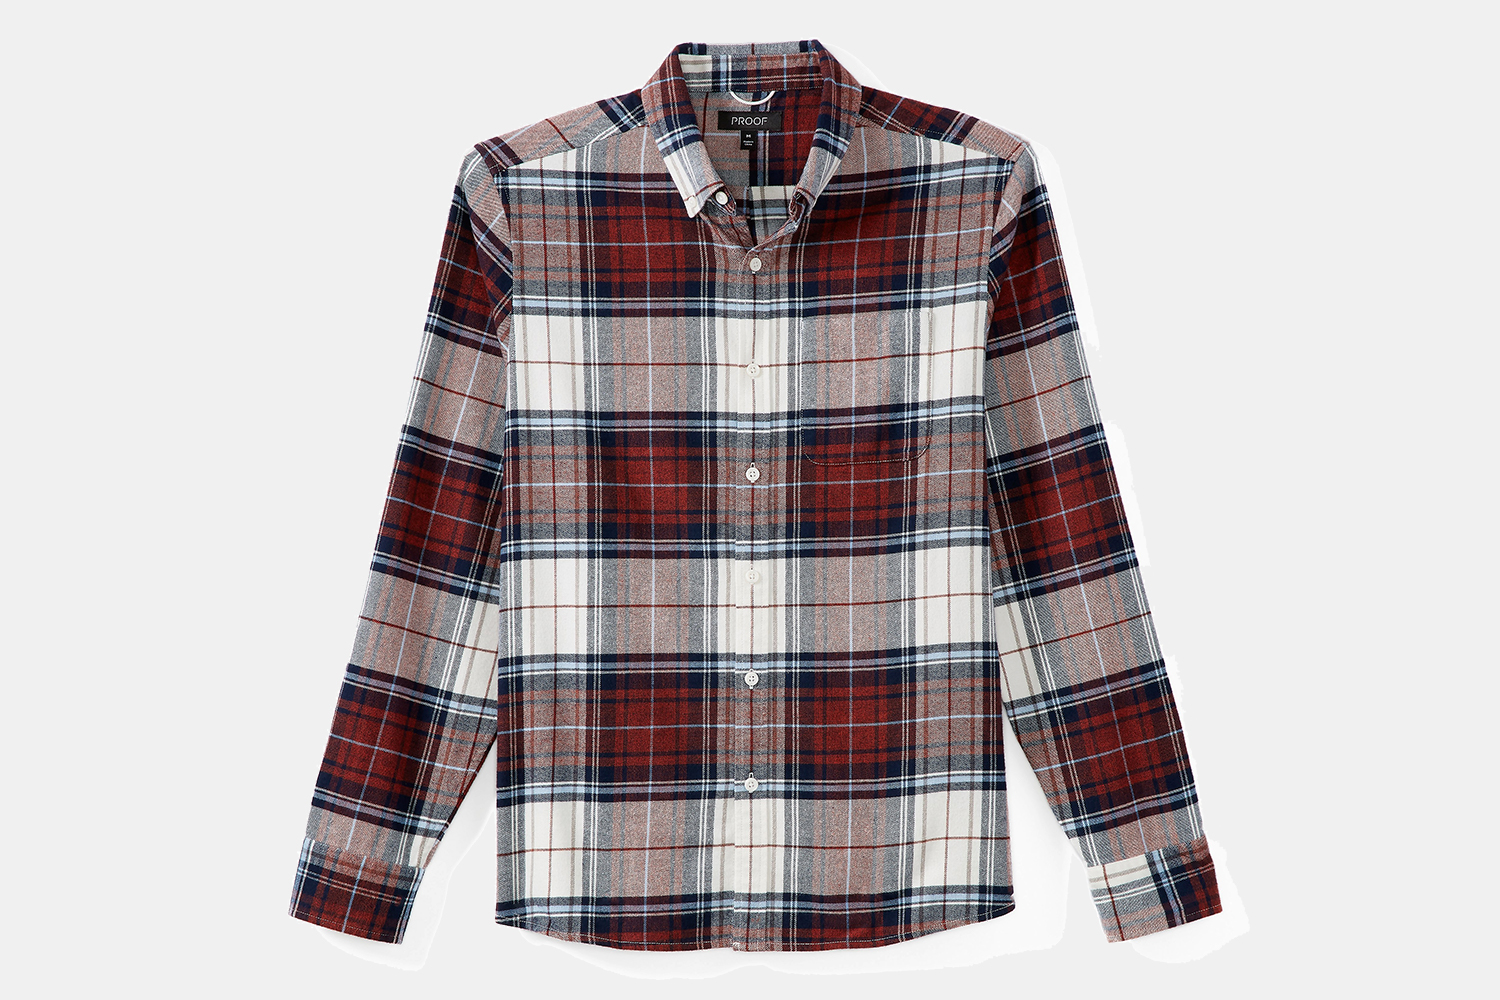 Men's red and white flannel shirt